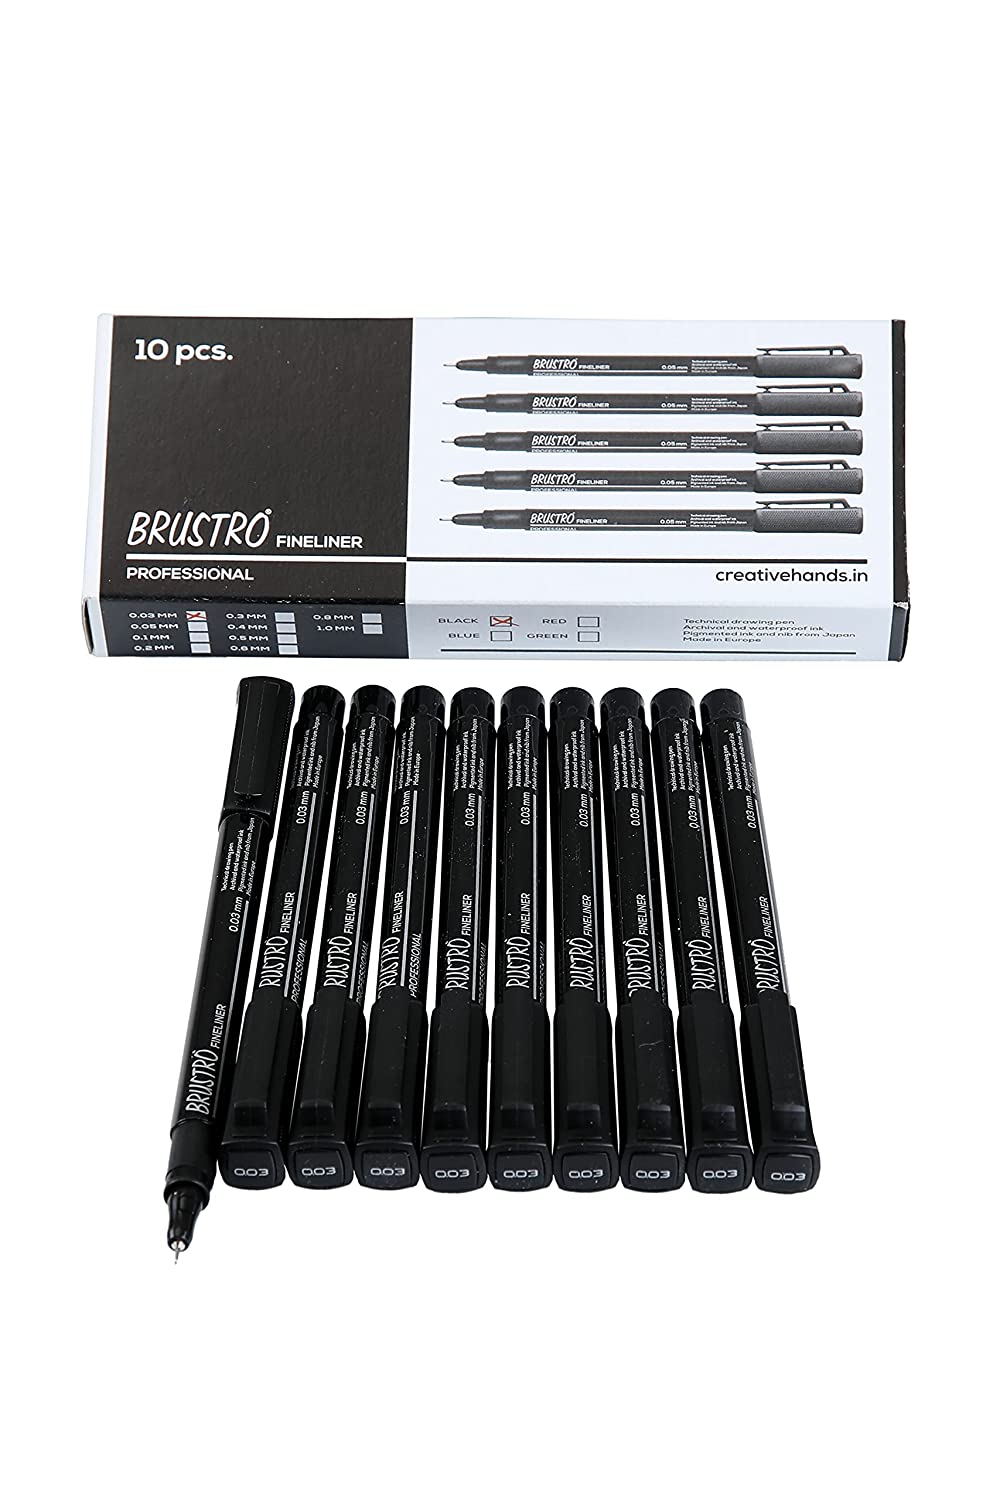 Brustro Professional Pigment Based Fineliner (tip Size of 0.03 mm, Black and Archival Waterproof UV Resistant Ink)